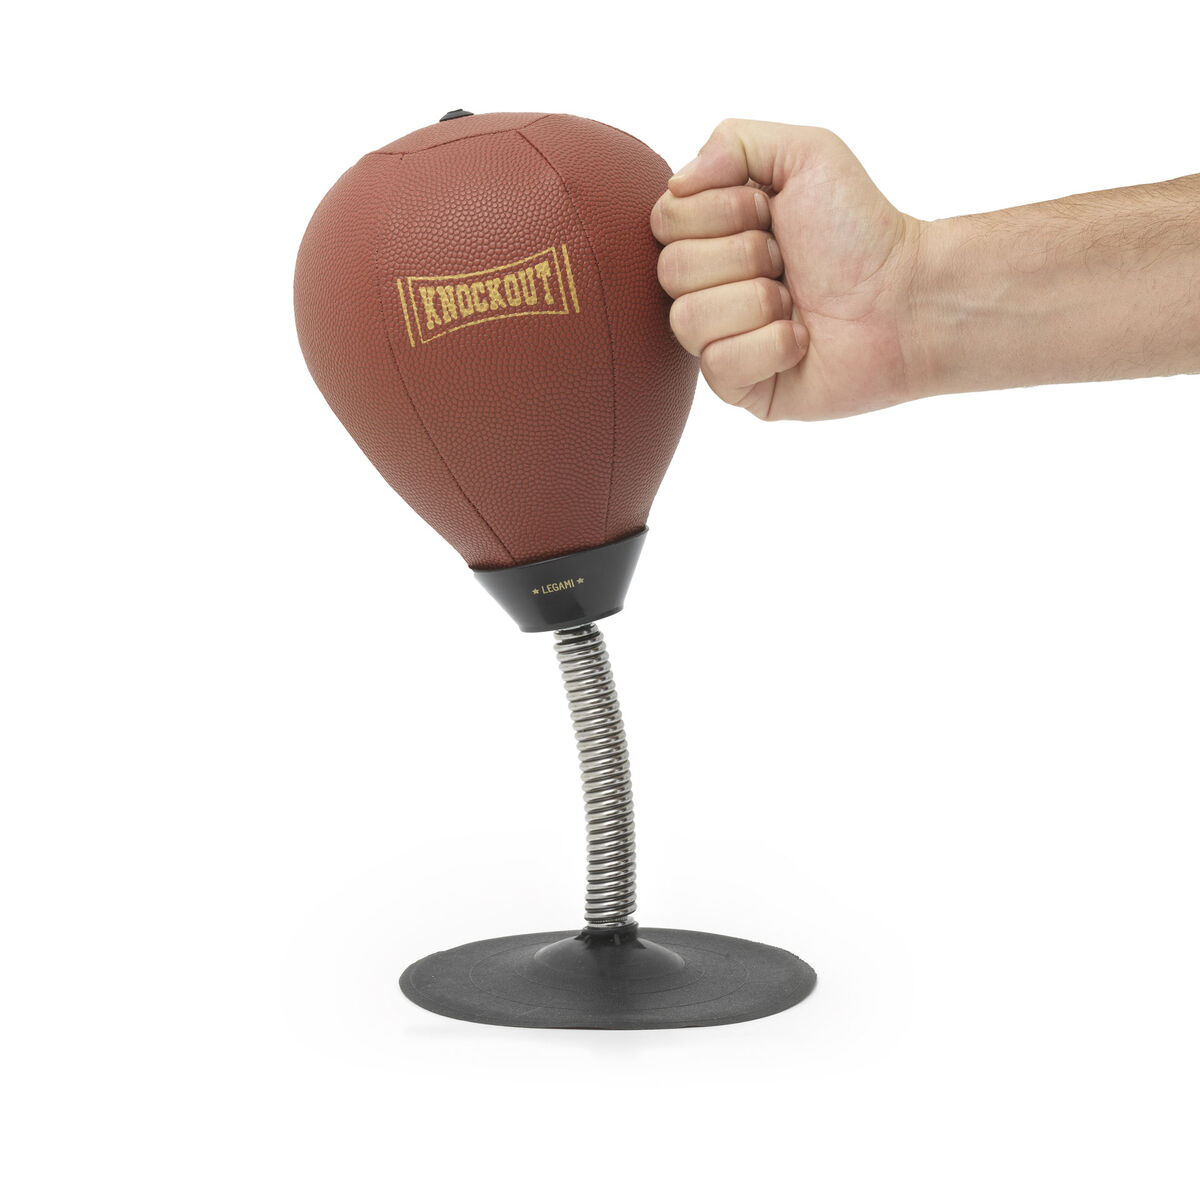 Knockout - Tabletop Punching Bag, , zoo